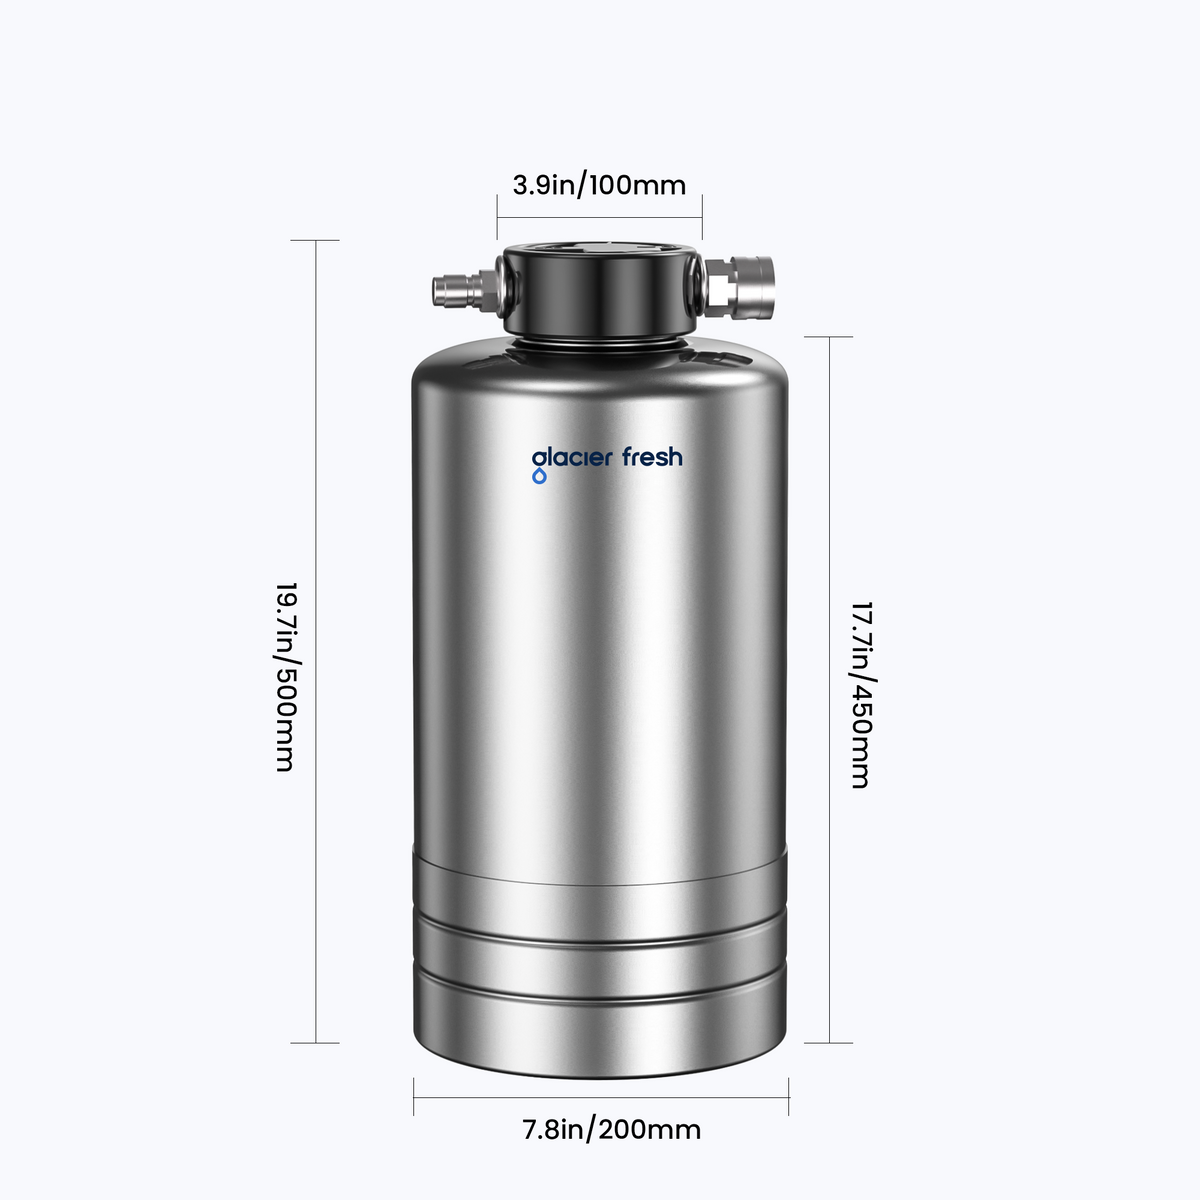 Glacier Fresh Portable RV Water Softener, 16,000 Grain with Stainless Steel Garden Hose Quick Connects for RVs